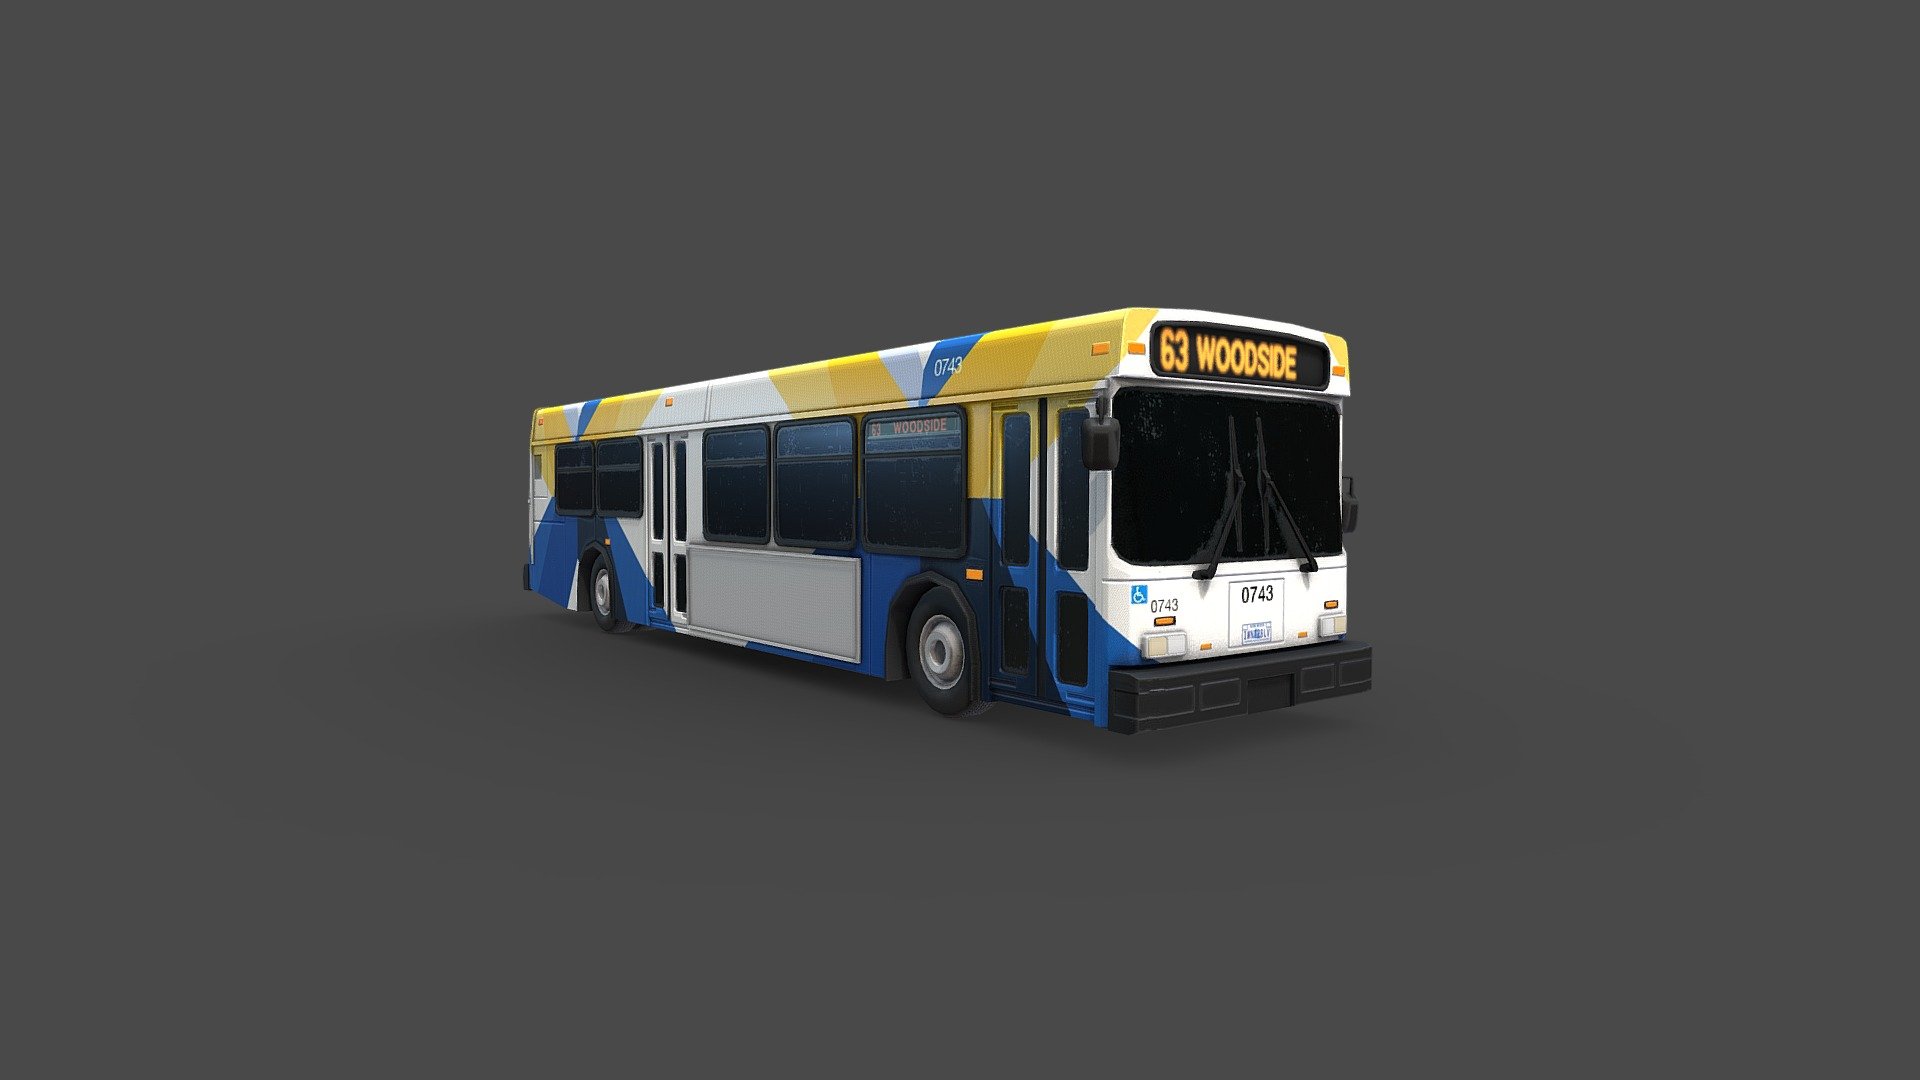 Transit bus, modeled after the New Flyer D40LF, painted in Halifax Transit colors. (Logos left off for copyright purposes.)

Modeled in Maya 2016, textured in Substance Painter 2019.3.3 - City Bus [Halifax Transit Colors] - 3D model by Evan Hiltz (@evan.hiltz) 3d model